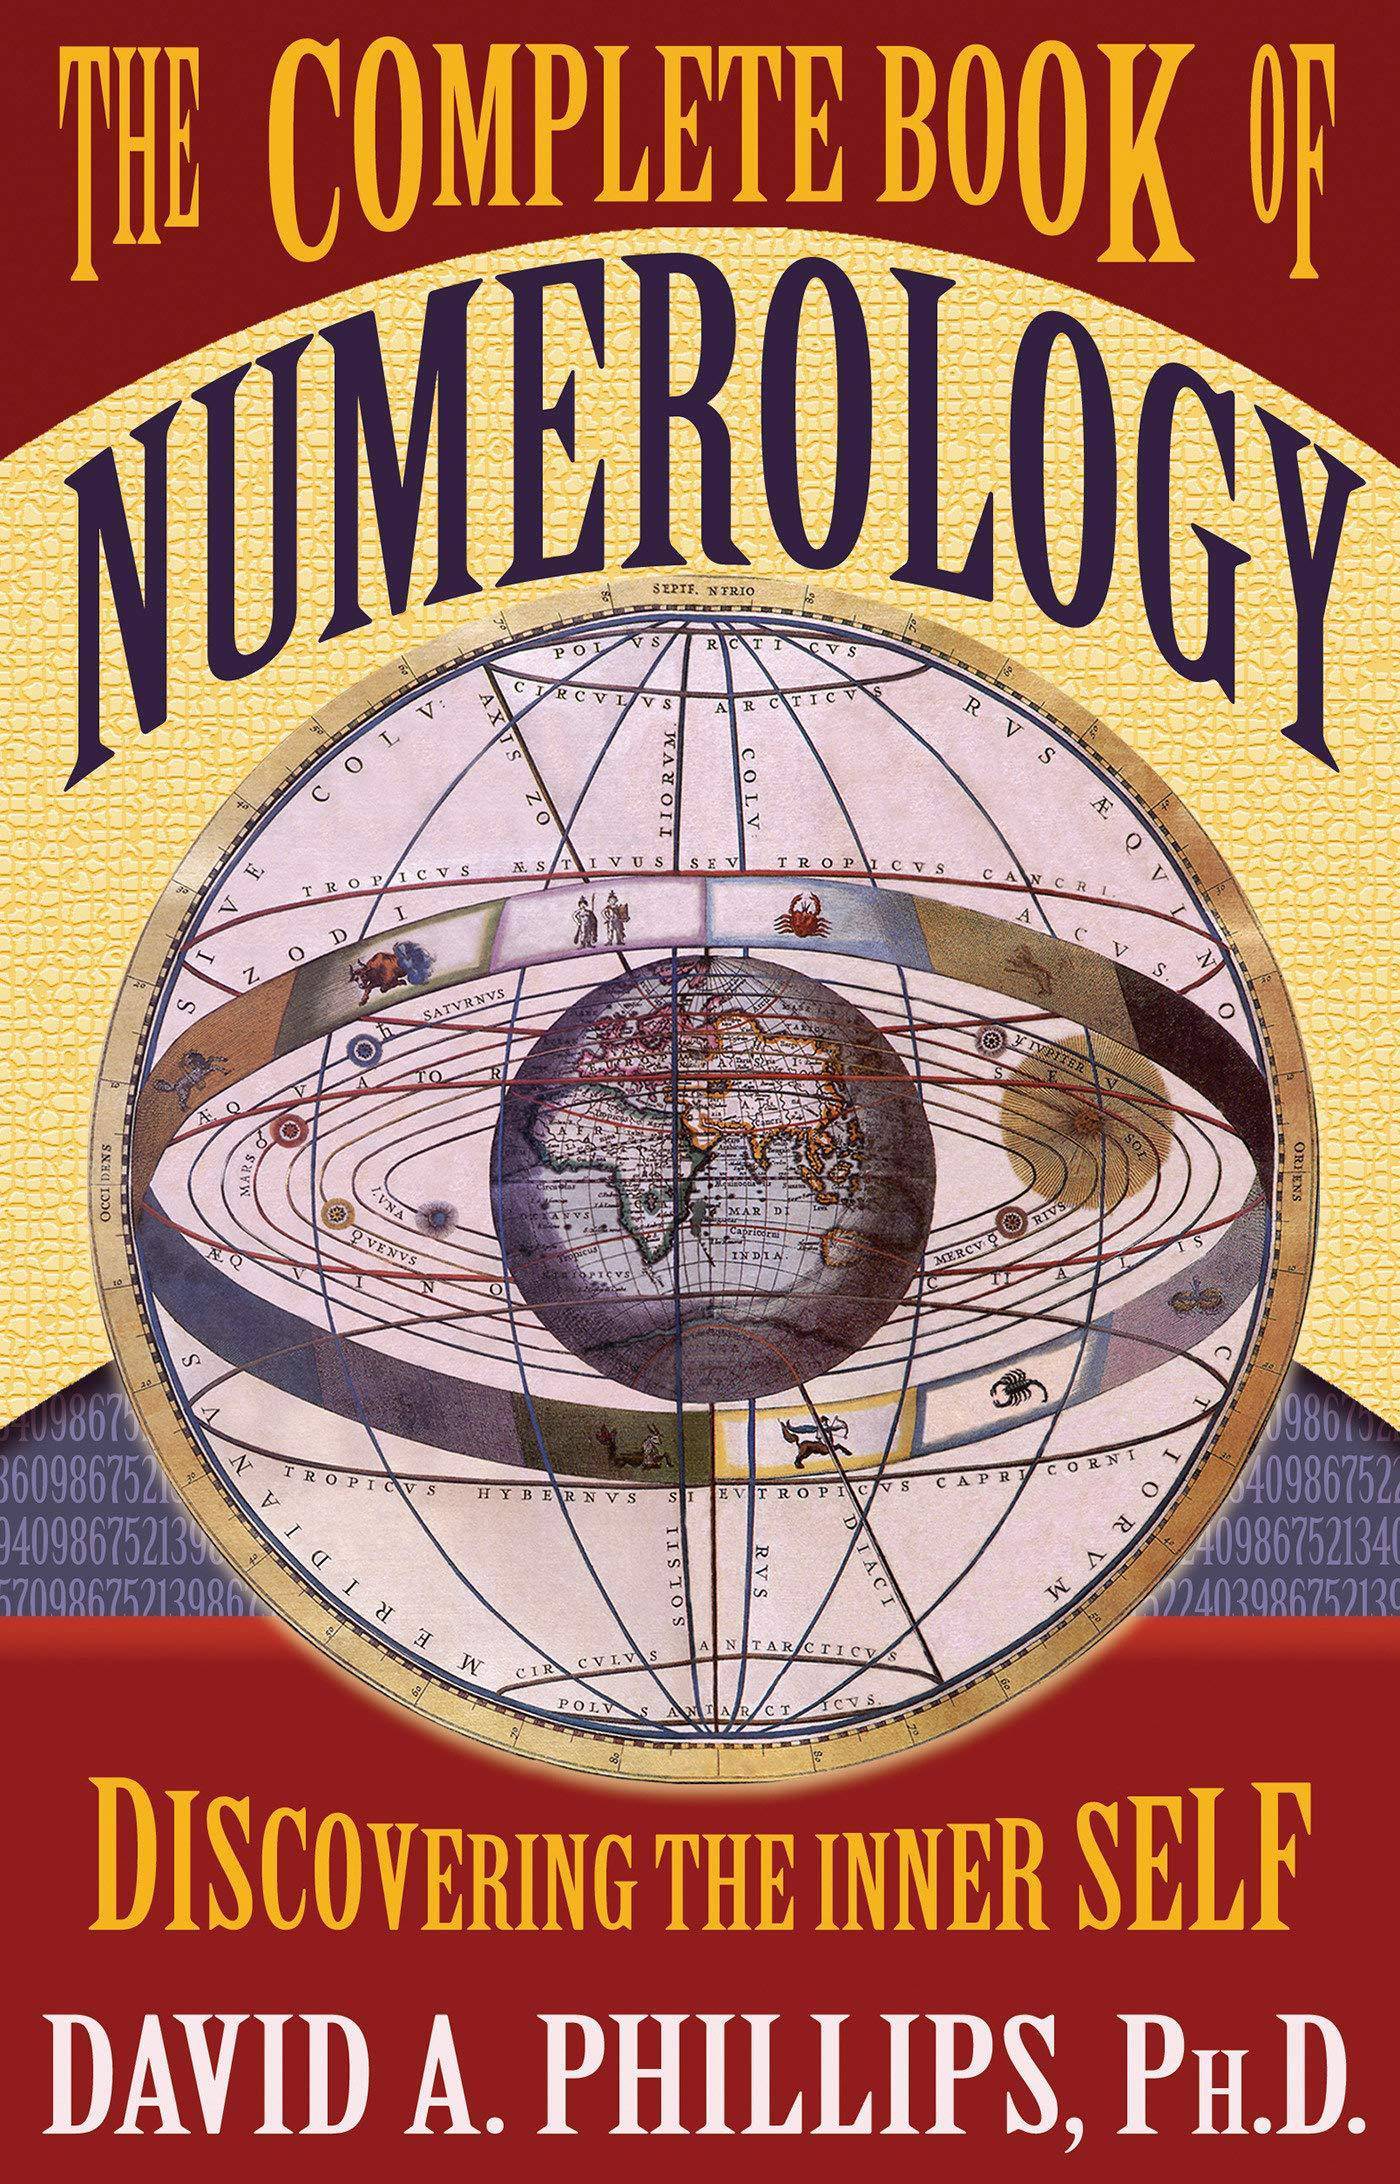 The Complete Book of Numerology - SureShot Books Publishing LLC